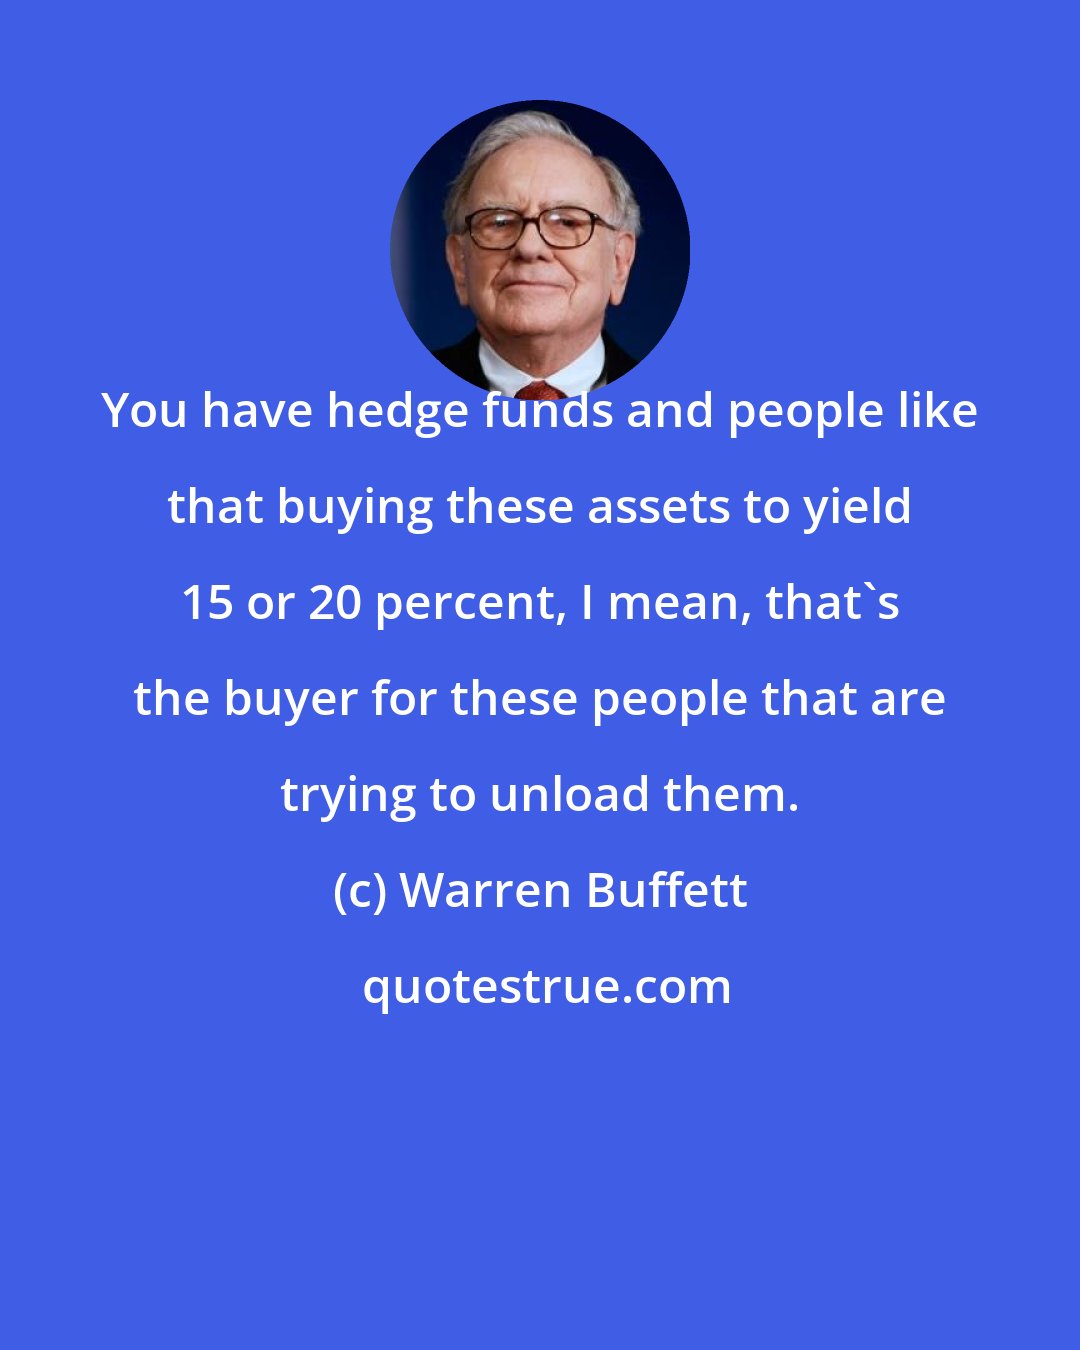 Warren Buffett: You have hedge funds and people like that buying these assets to yield 15 or 20 percent, I mean, that's the buyer for these people that are trying to unload them.